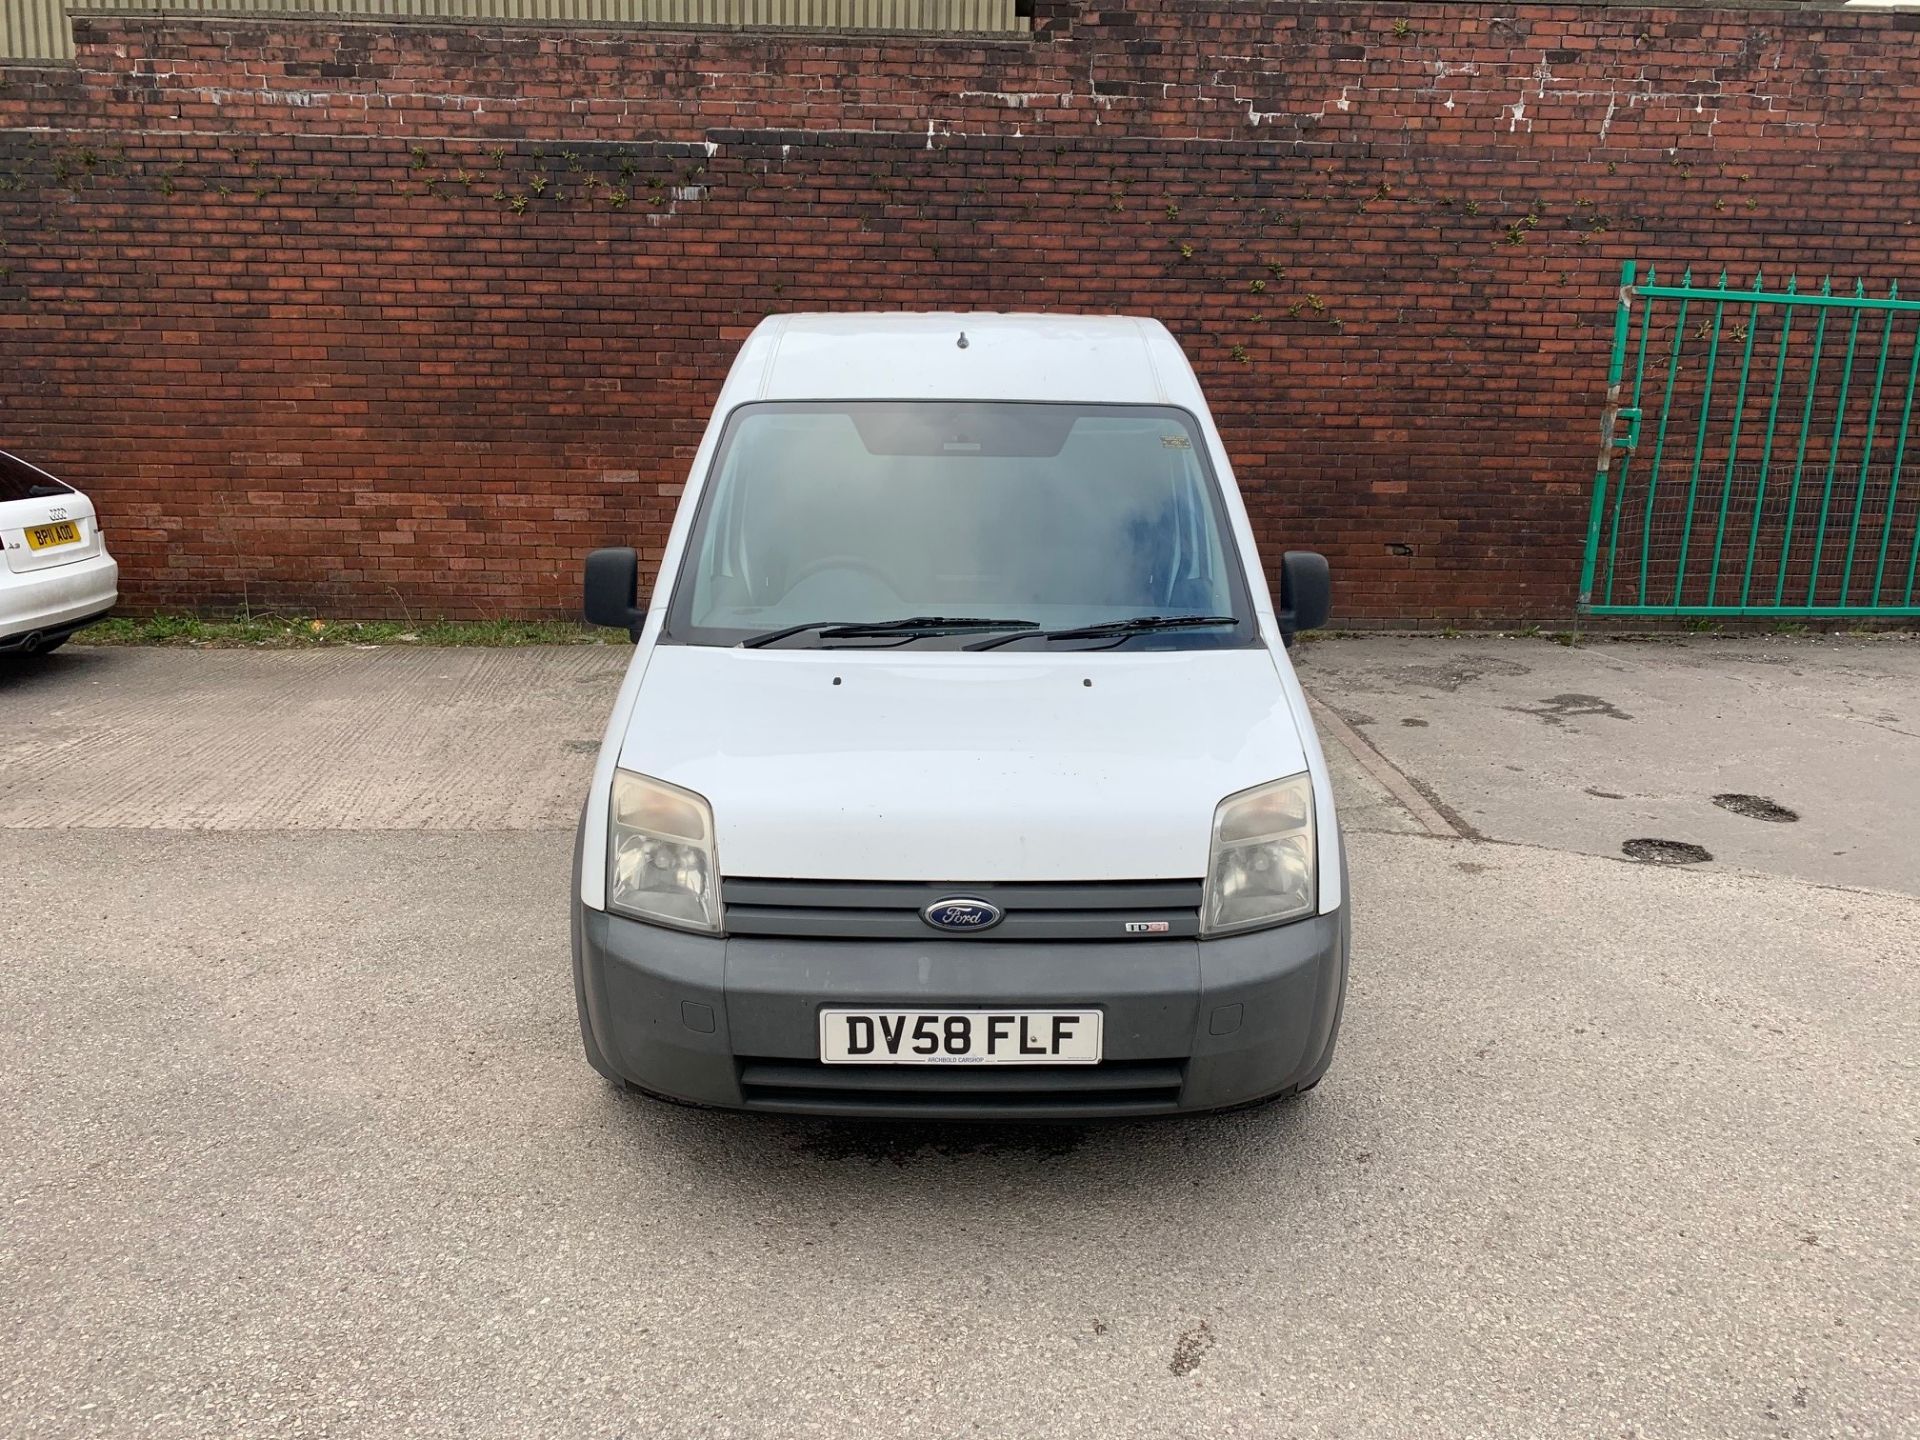 Ford Transit Connect Van - 1.8L Diesel, 175,000 Miles, Starts & Drives Very Well, MOT'd Until June - Image 2 of 14